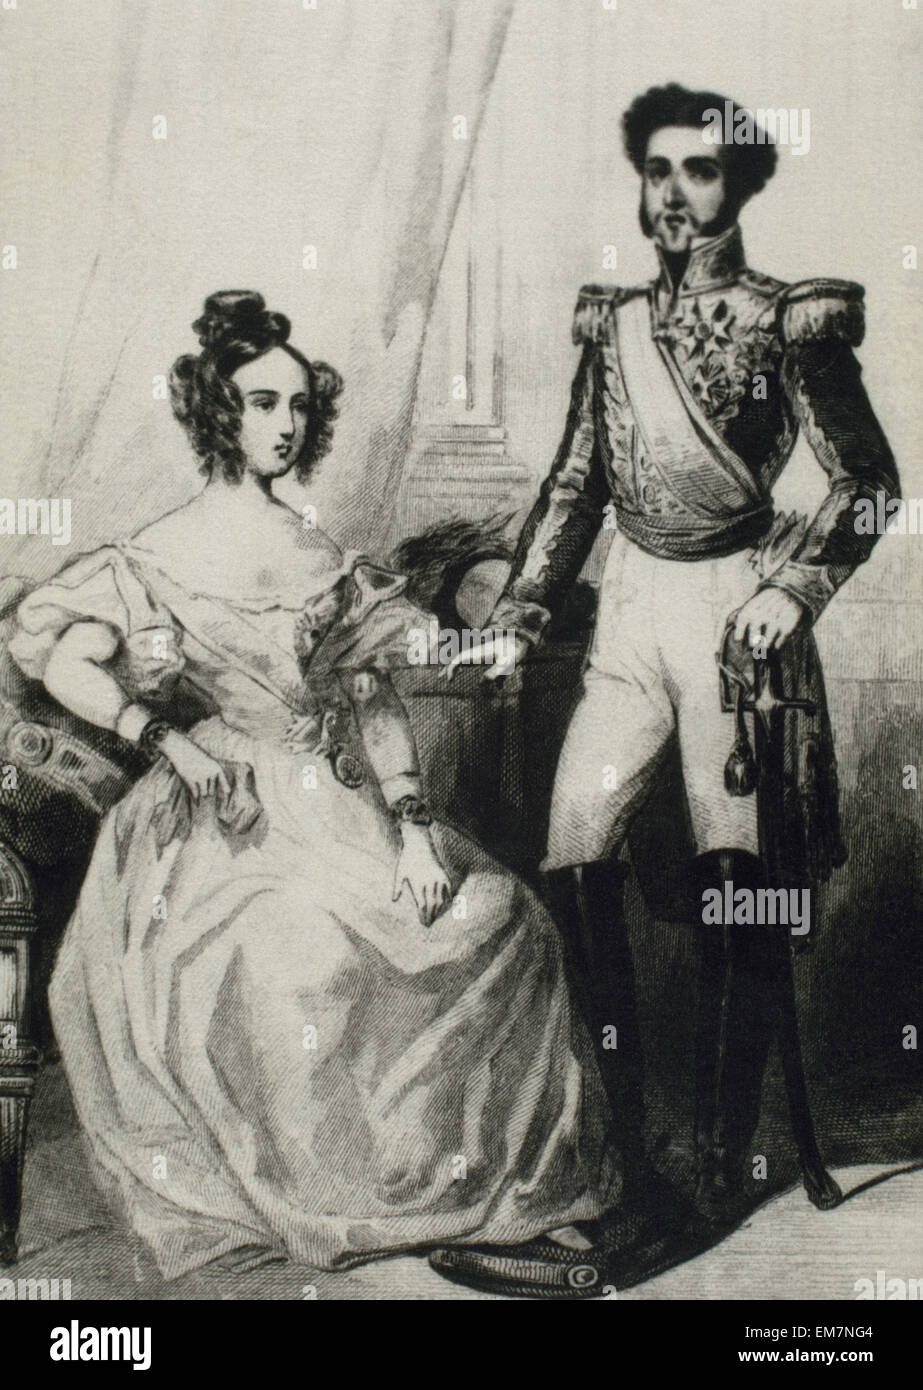 Maria I (1734-1816) Queen of Portugal, Brazil and Algarves and Peter III of Portugal (1717-1786). Engraving. 19th century. Stock Photo